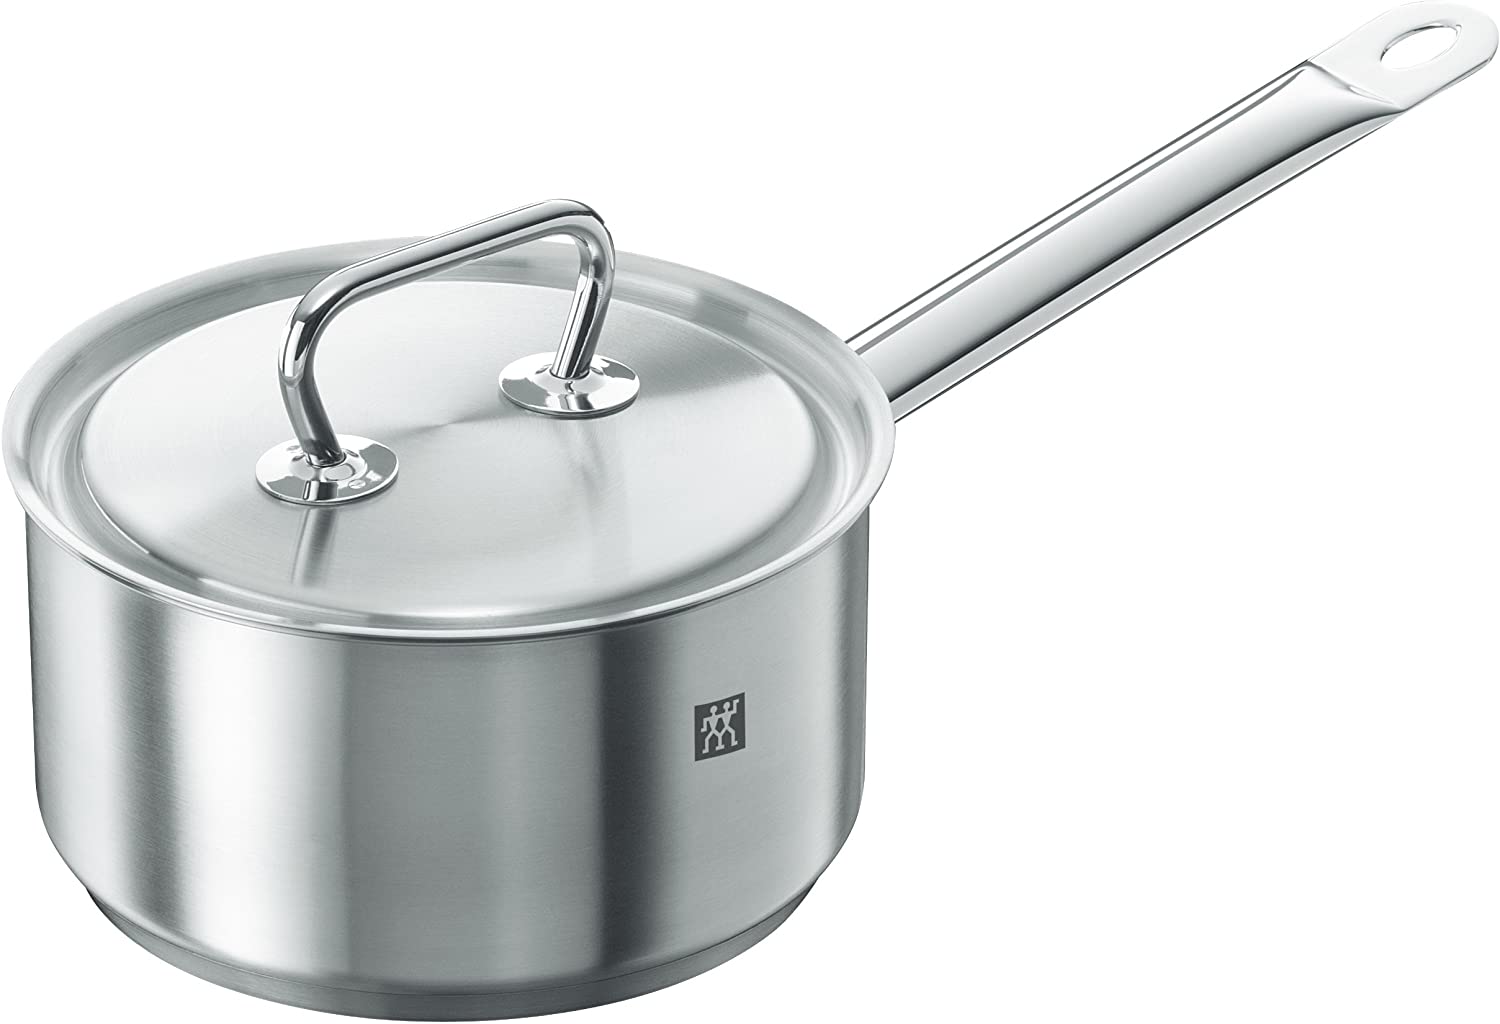 Zwilling Twin Classic 40915-180-0 Saucepan 2.2 L Suitable for Induction Cookers 18 cm Stainless Steel